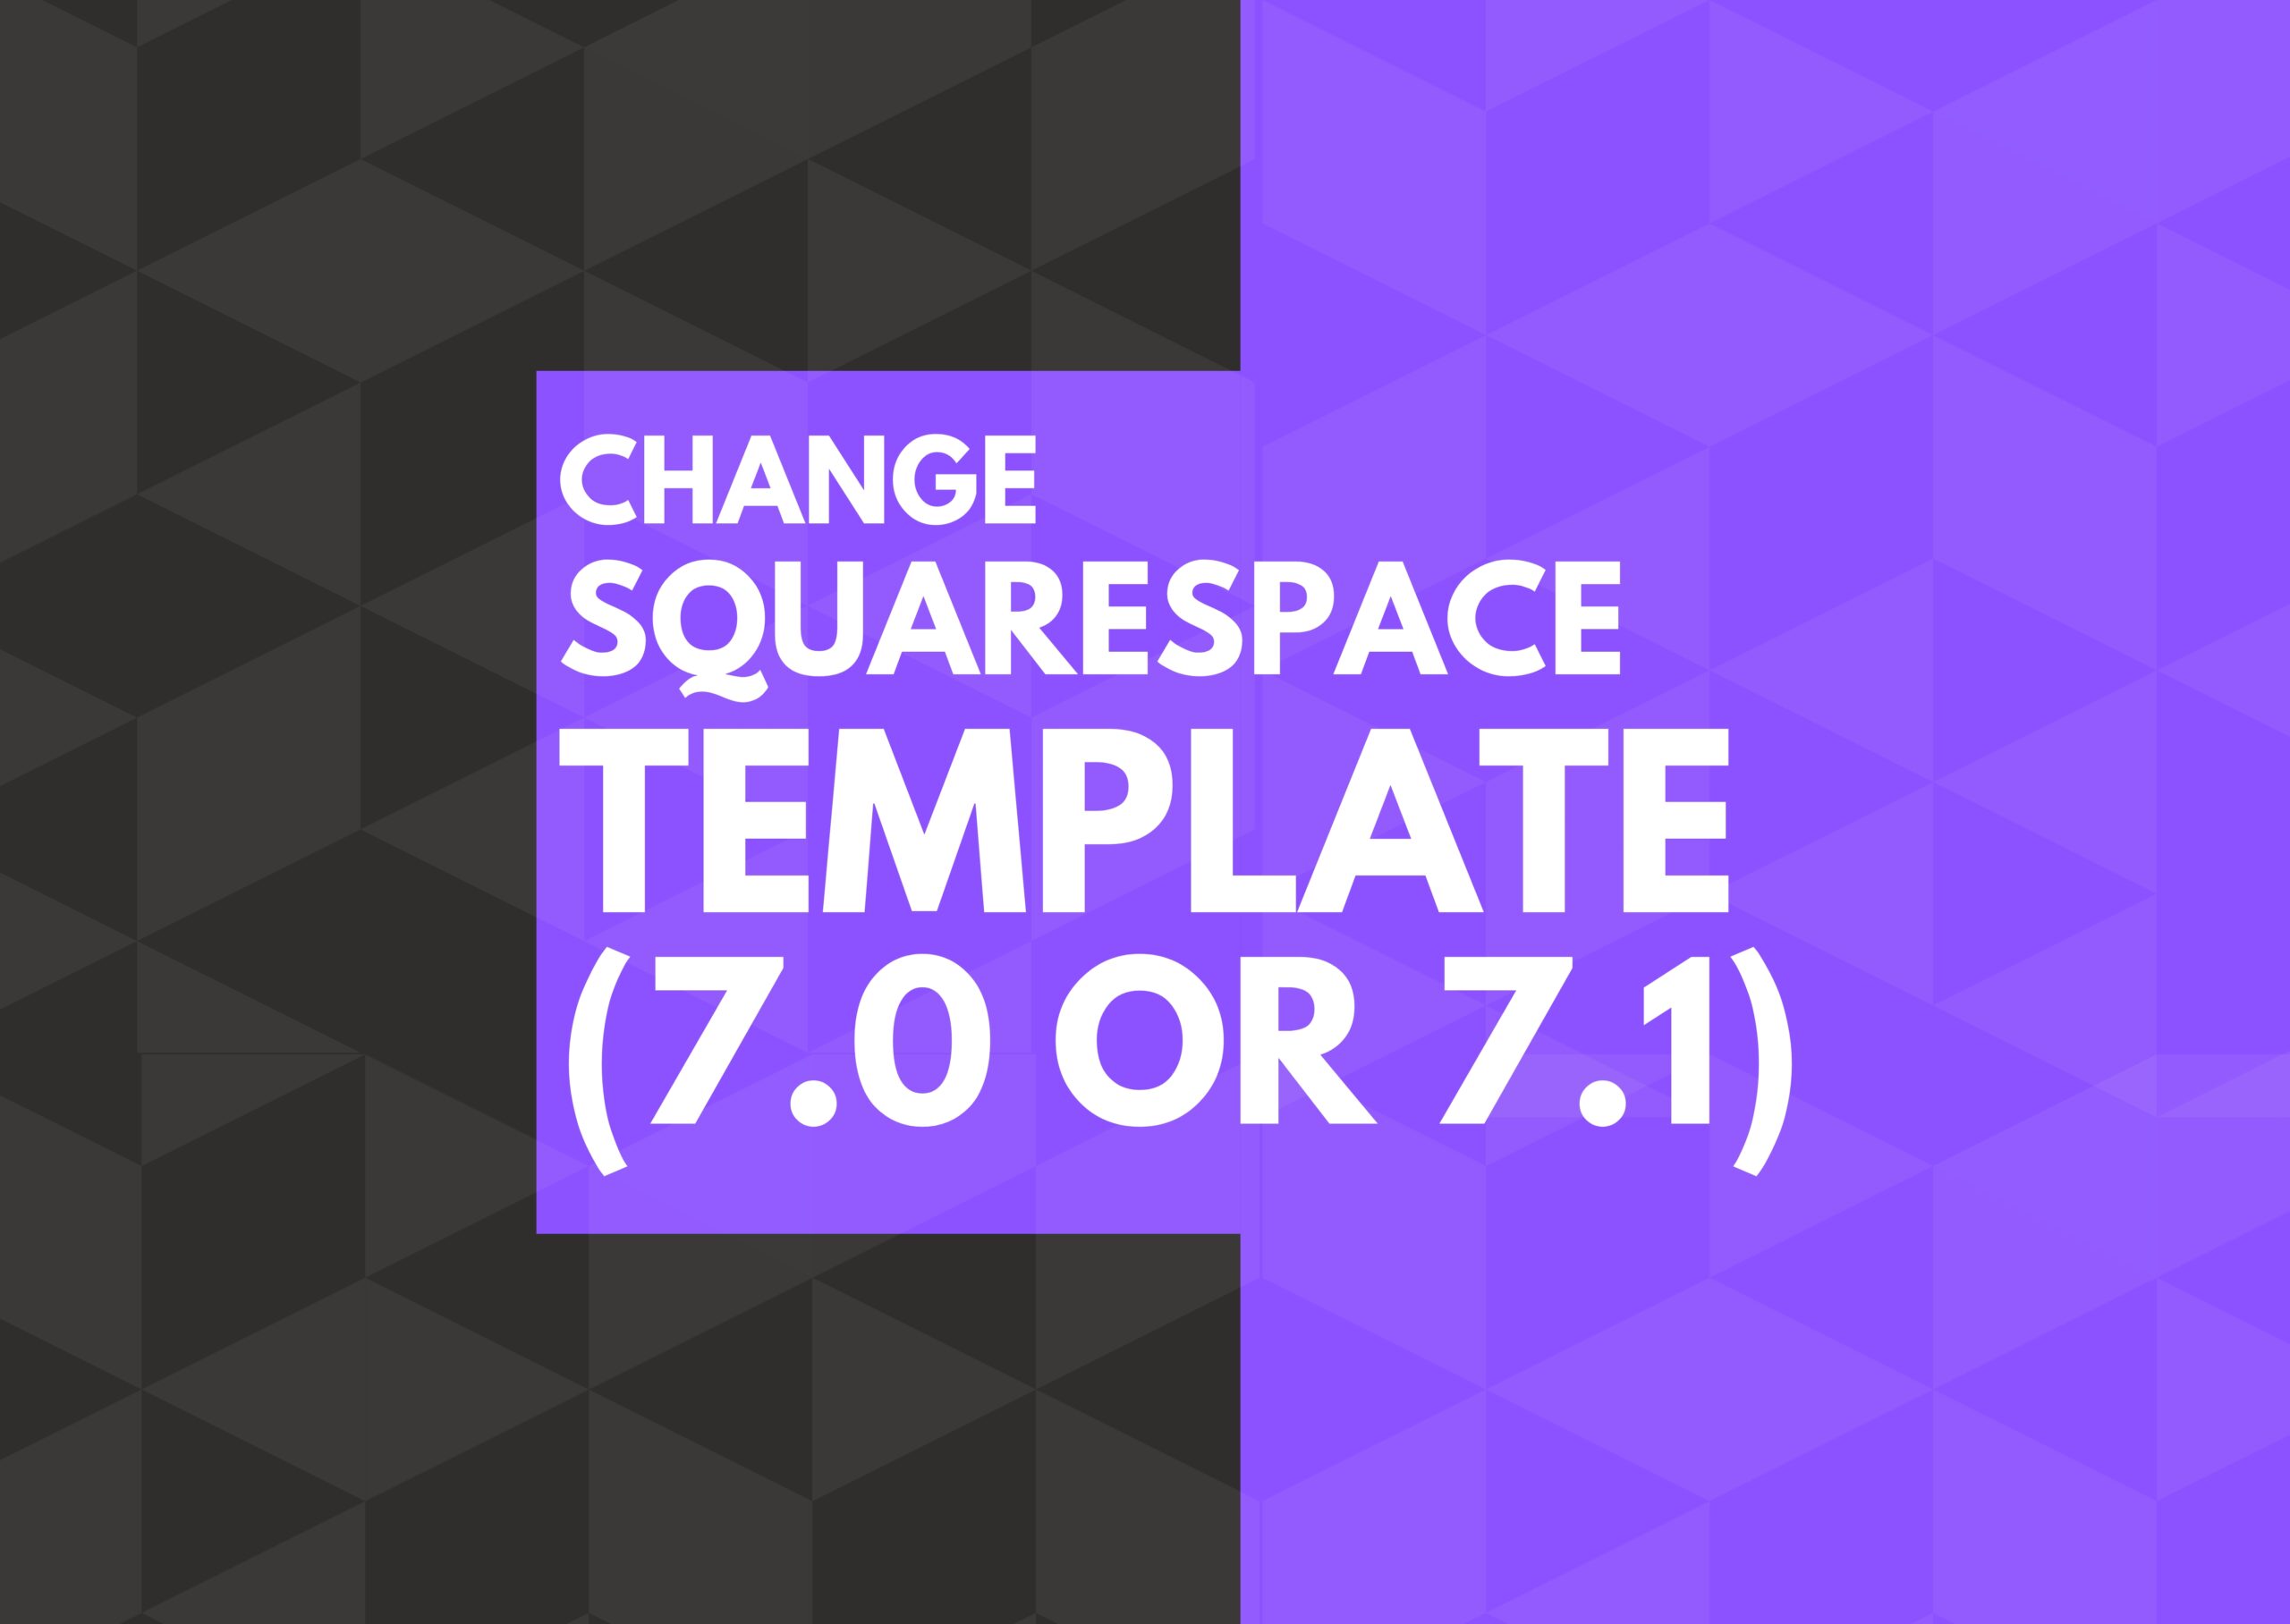 How to Change Your Squarespace Template (7 0 or 7 1)